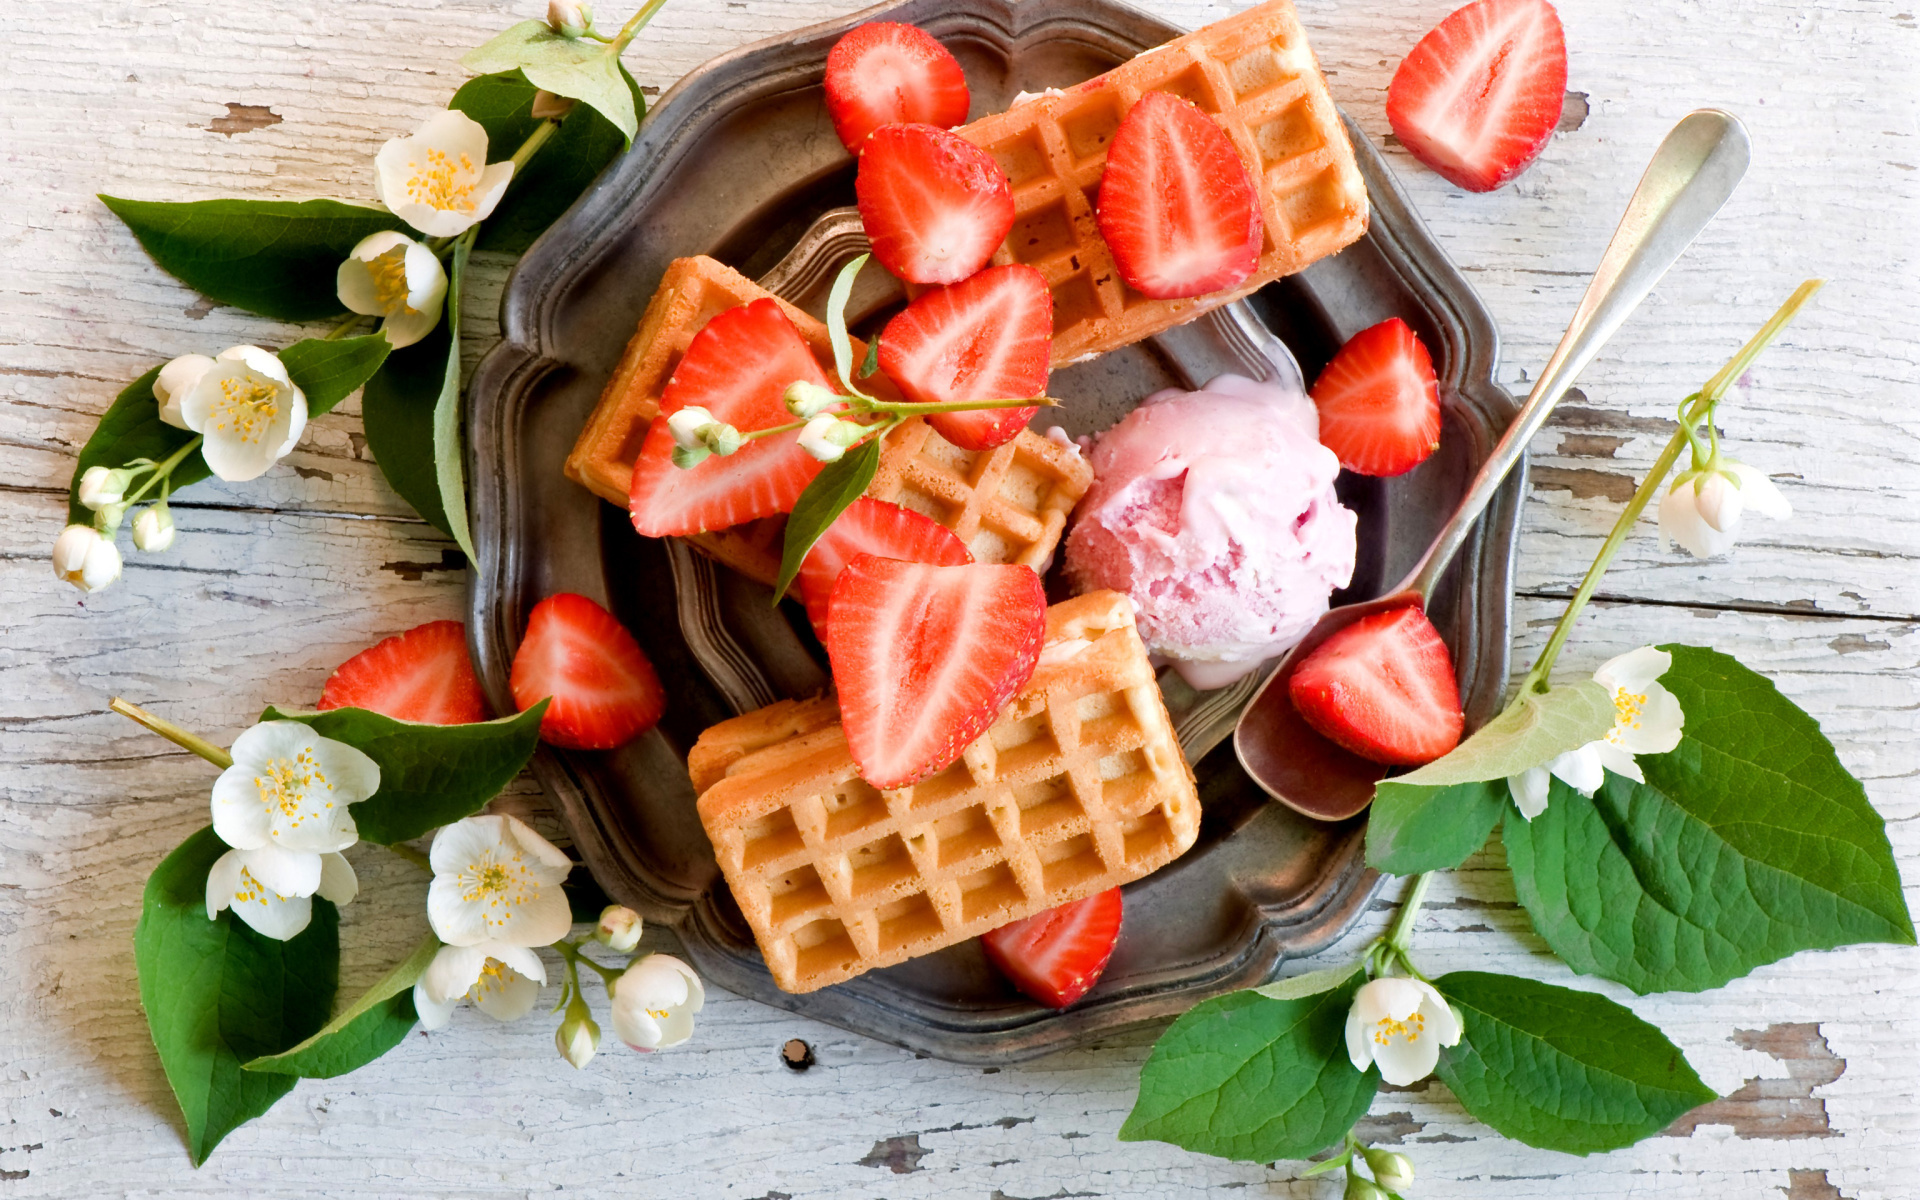 Waffle: True Belgian Waffles, Served for both breakfast and dessert, depending on the venue. 1920x1200 HD Wallpaper.